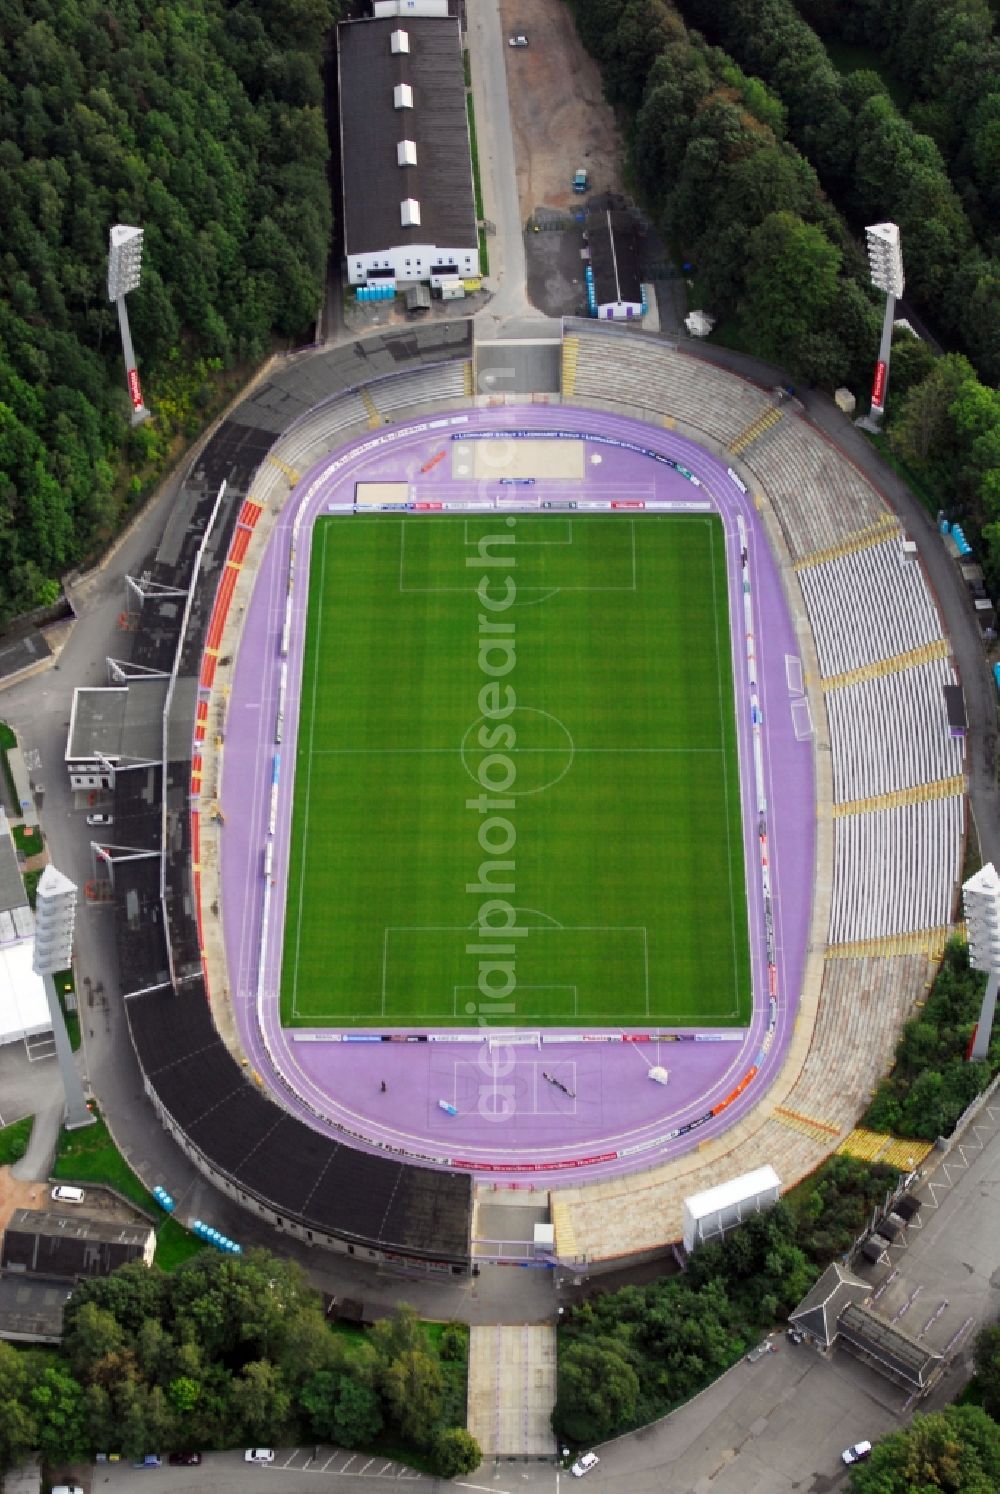 Aerial image Aue - Sports facility grounds of the Arena stadium - Sparkassen-Erzgebirgsstadion of FC Erzgebirge e. V. in Aue in the state Saxony